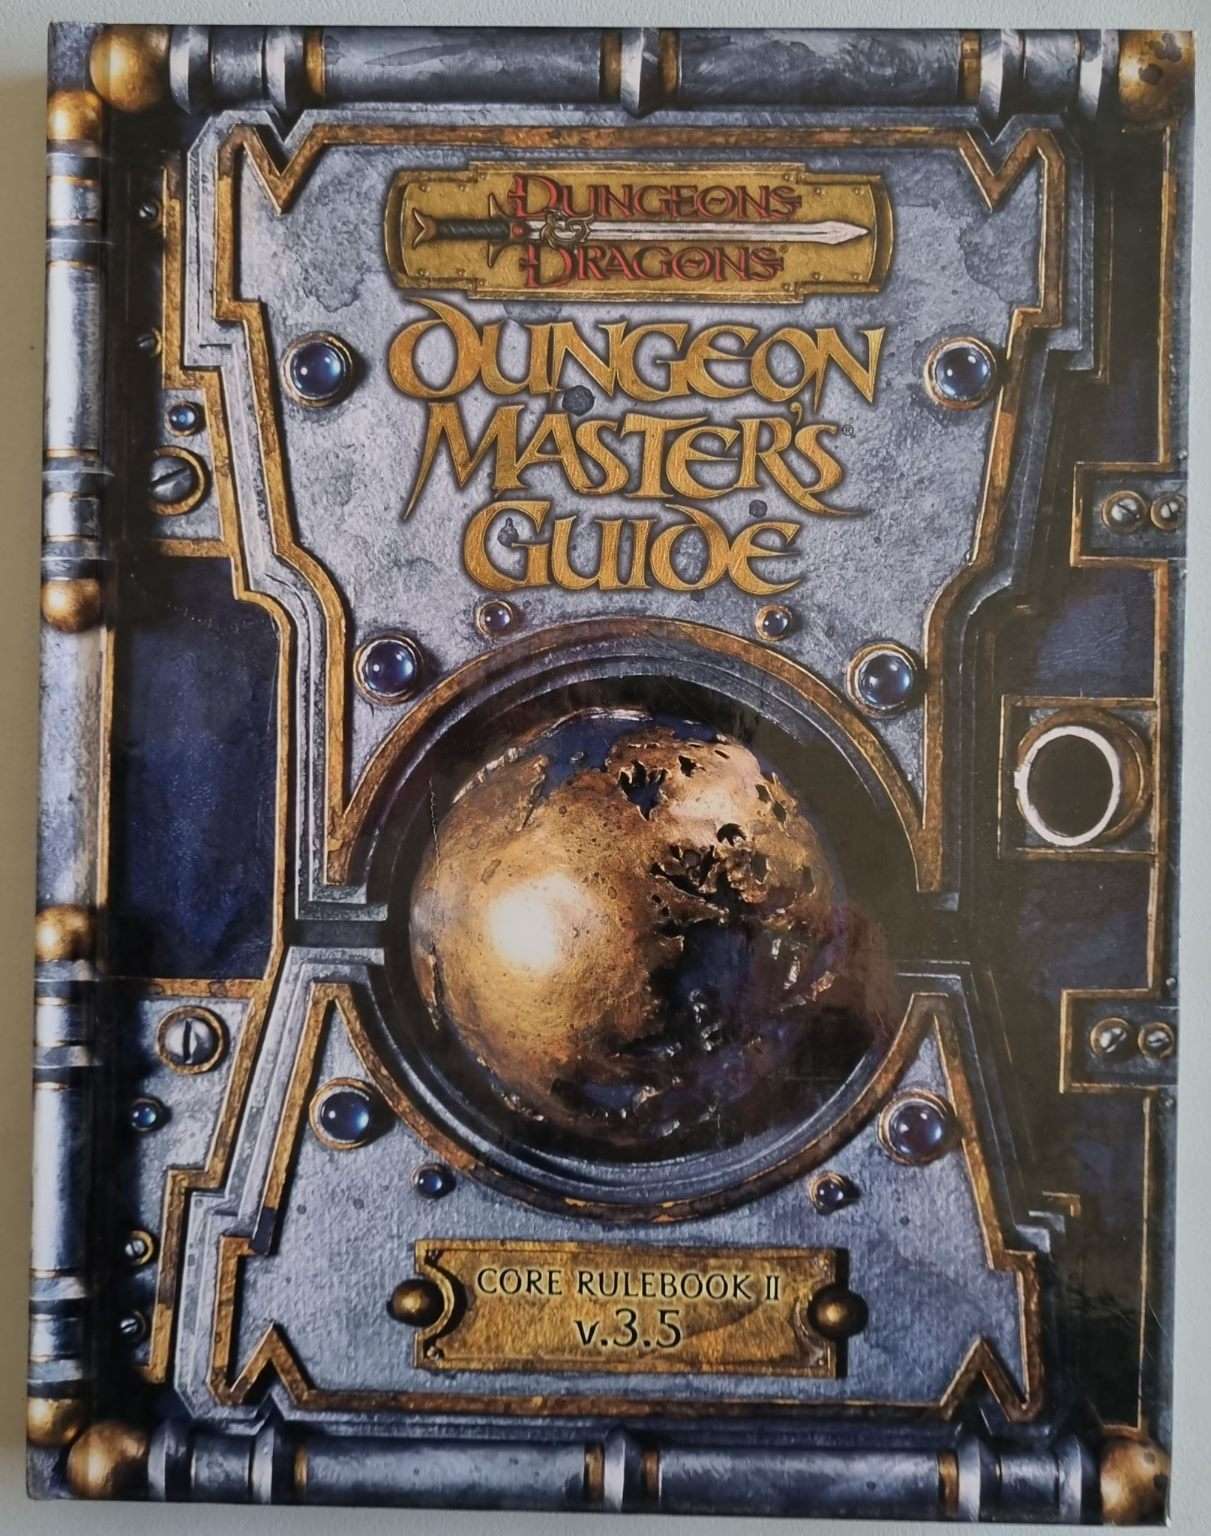 Dungeons and Dragons - Dungeon Master's Guide: Core Rulebook II 3.5 e